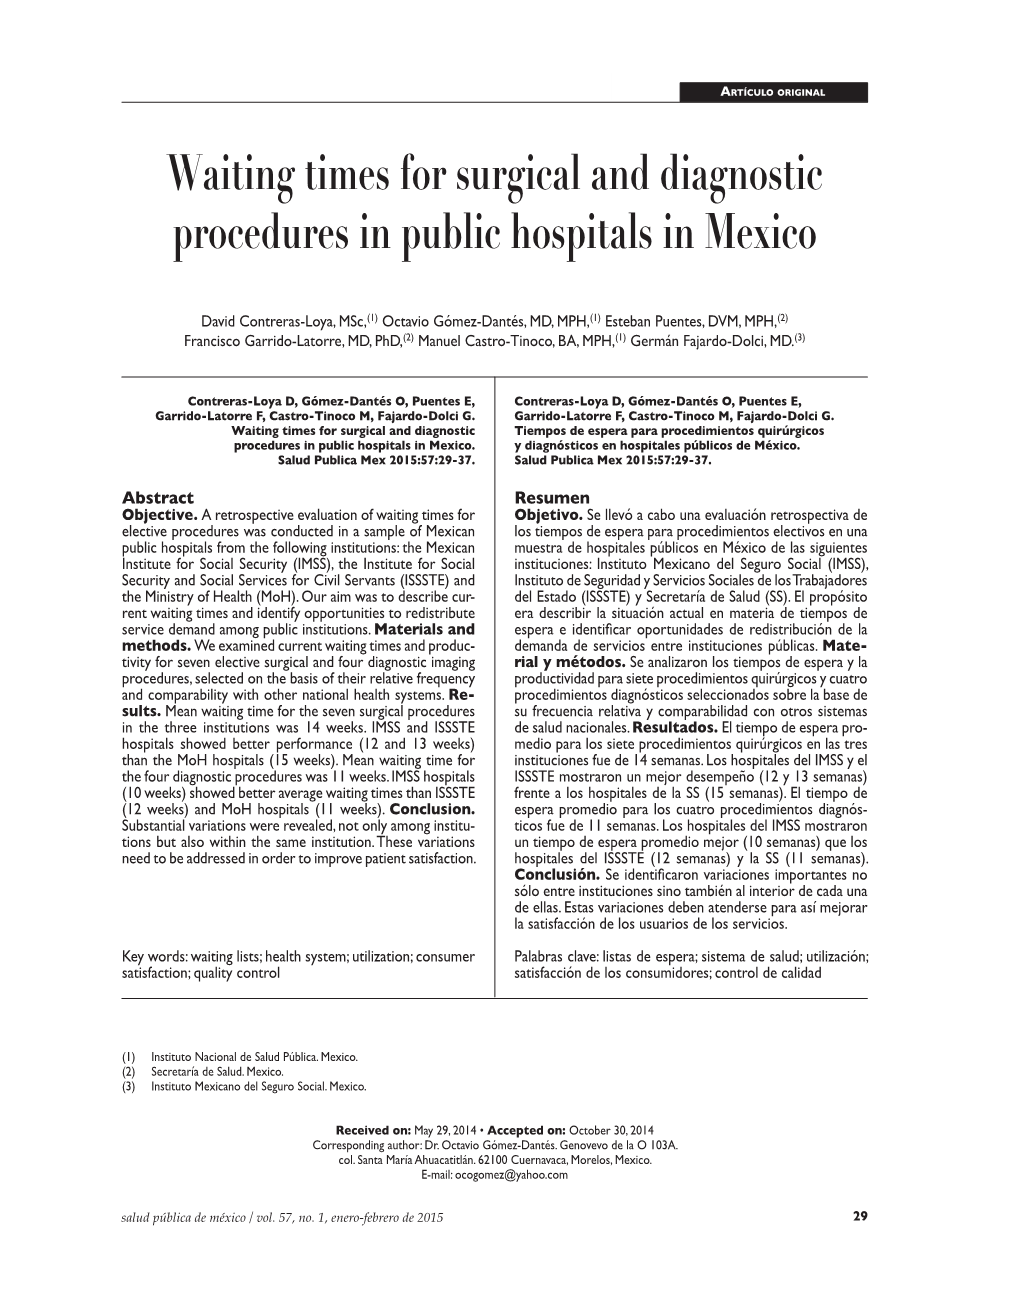 Waiting Times for Surgical and Diagnostic Procedures in Public Hospitals in Mexico